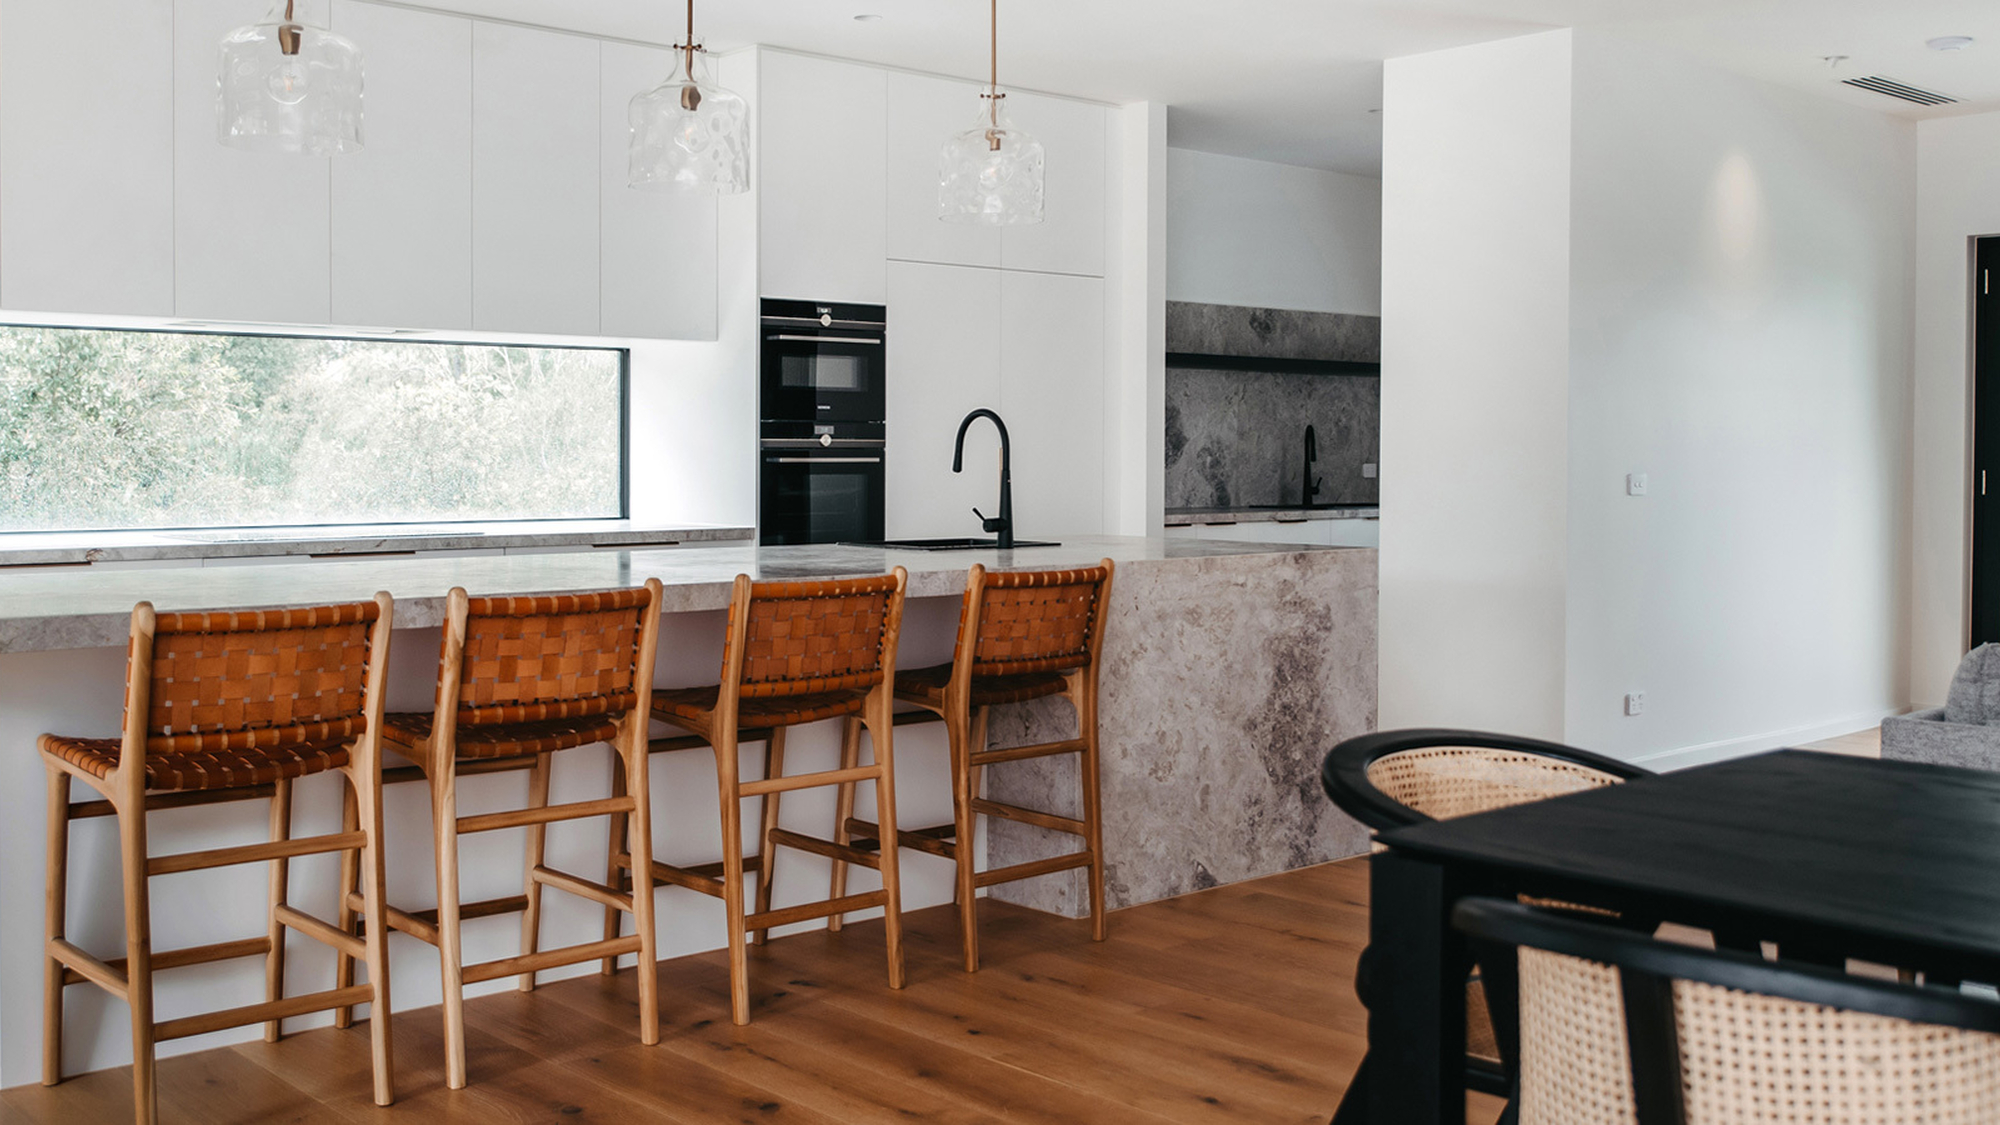 Melbourne's most reputable kitchen builders